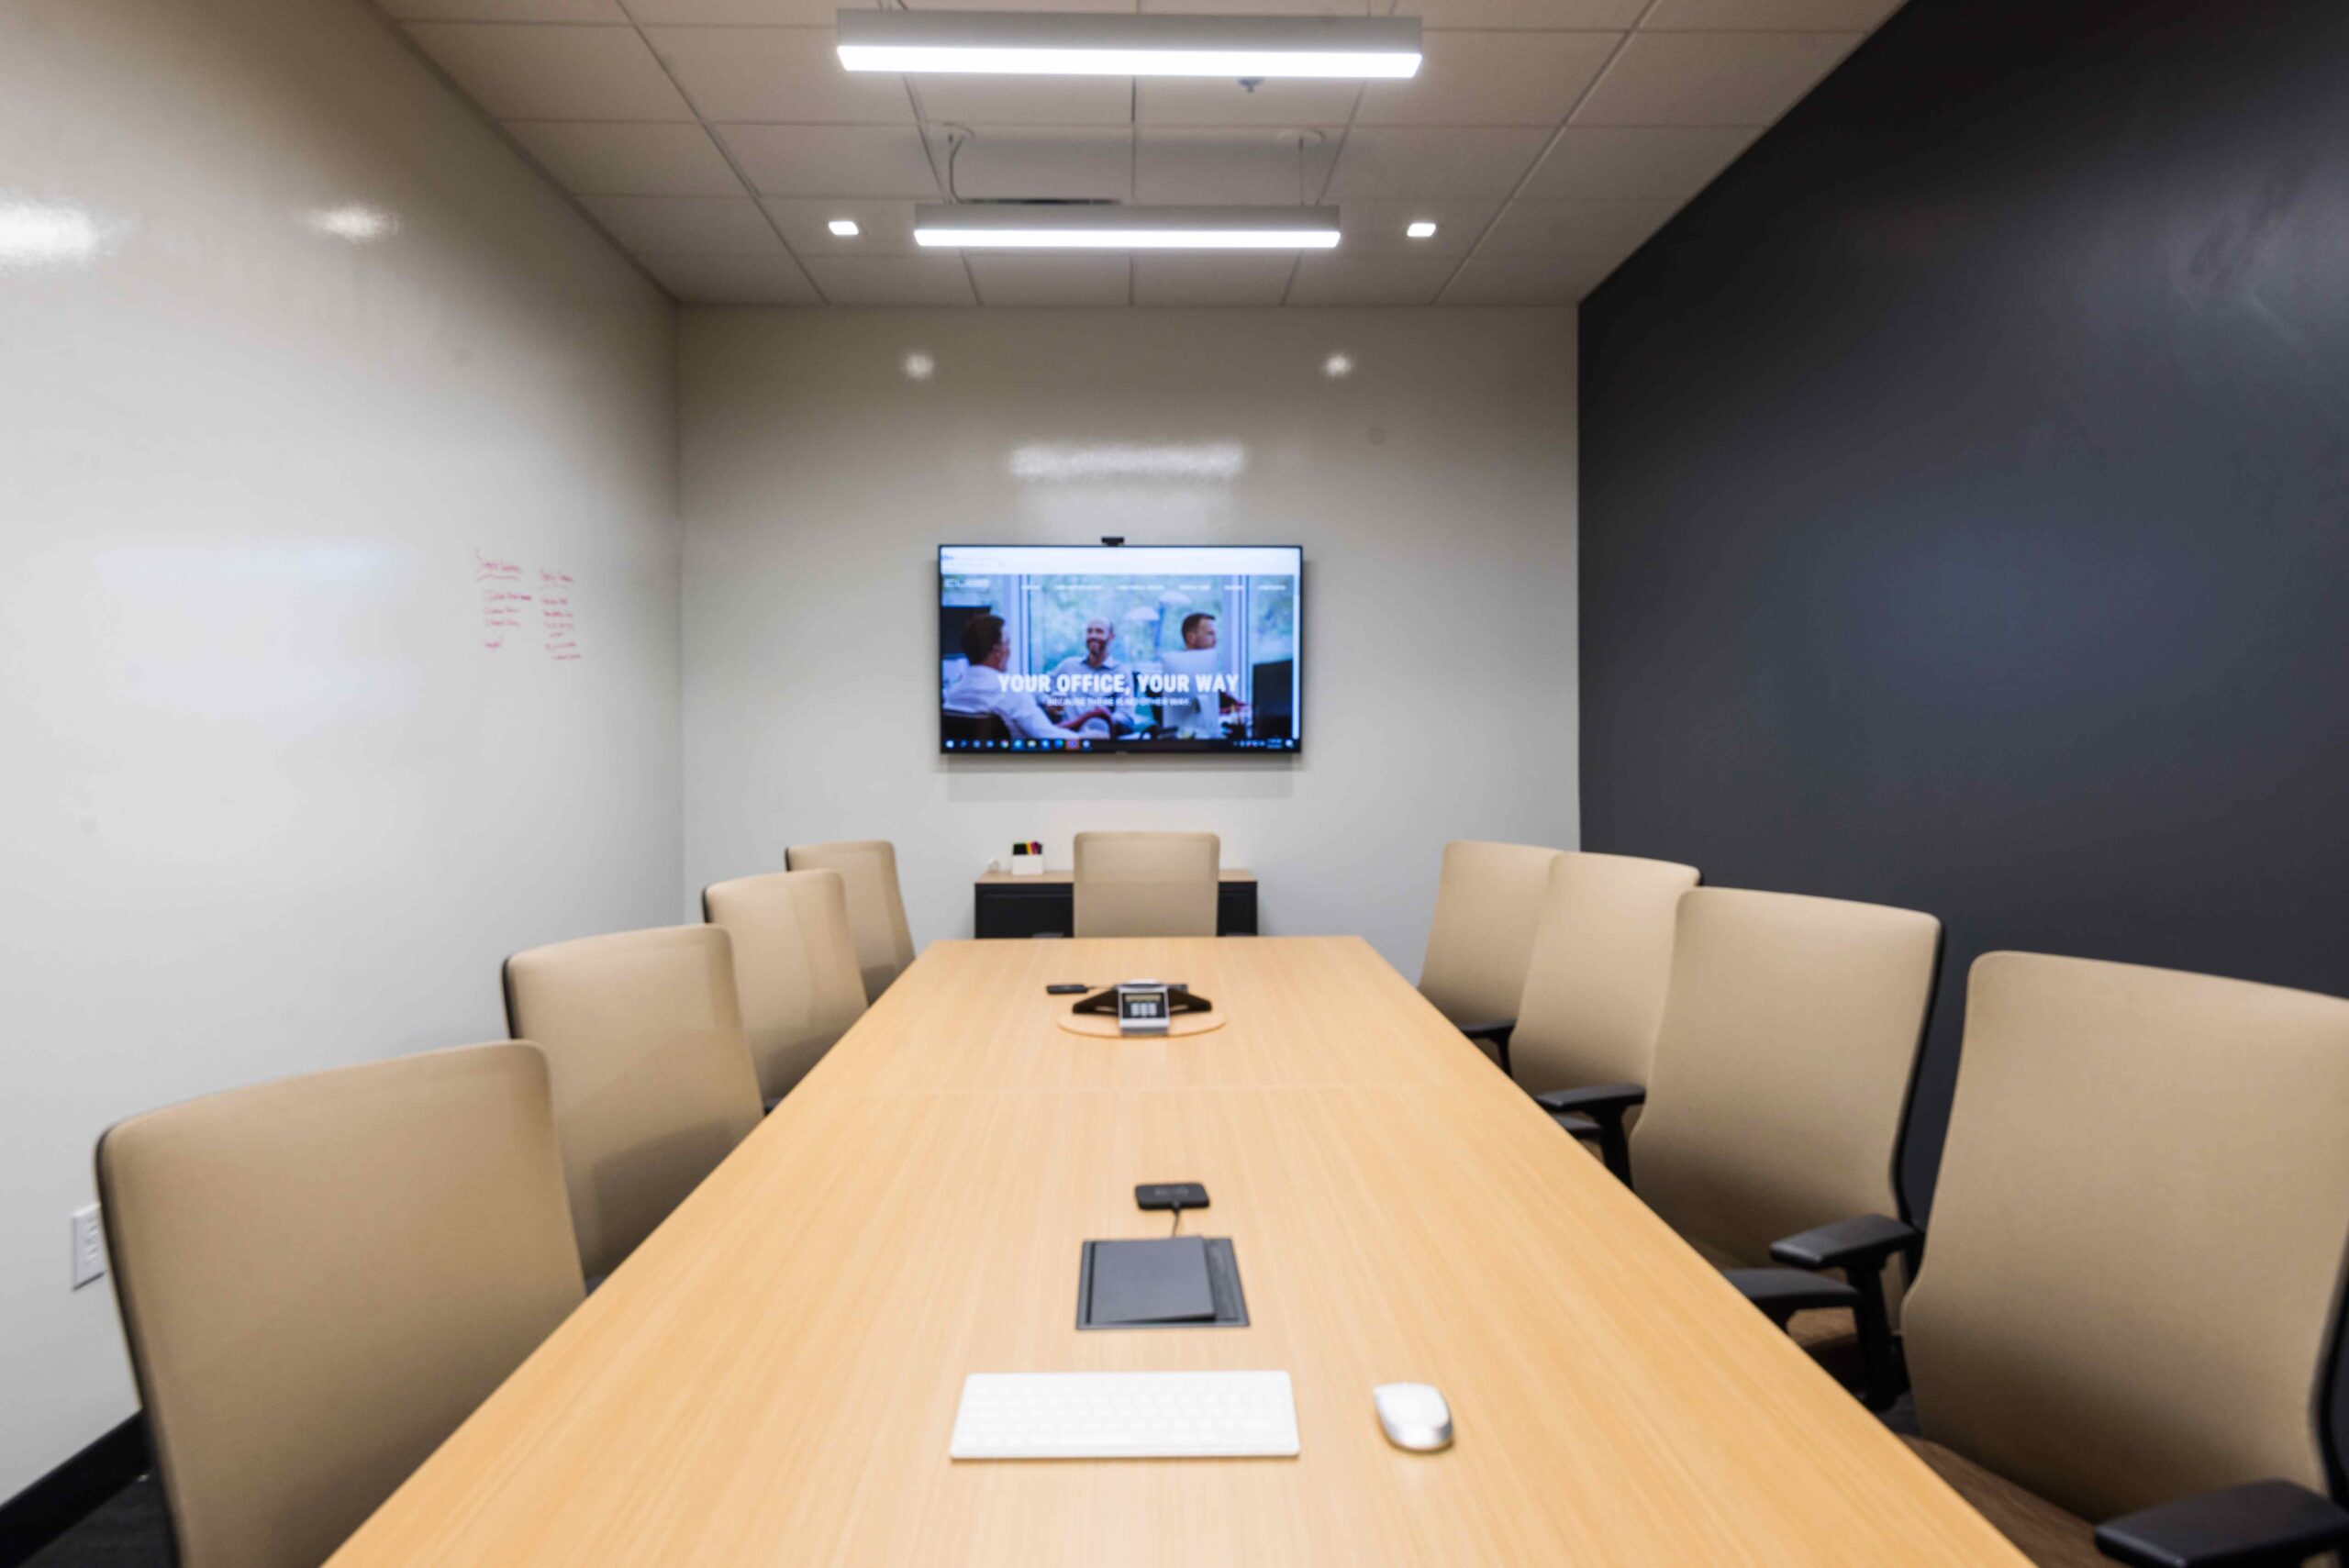 Dallas Meeting Space. Conference room table shares space for 9 people, space includes a TV and whiteboard.